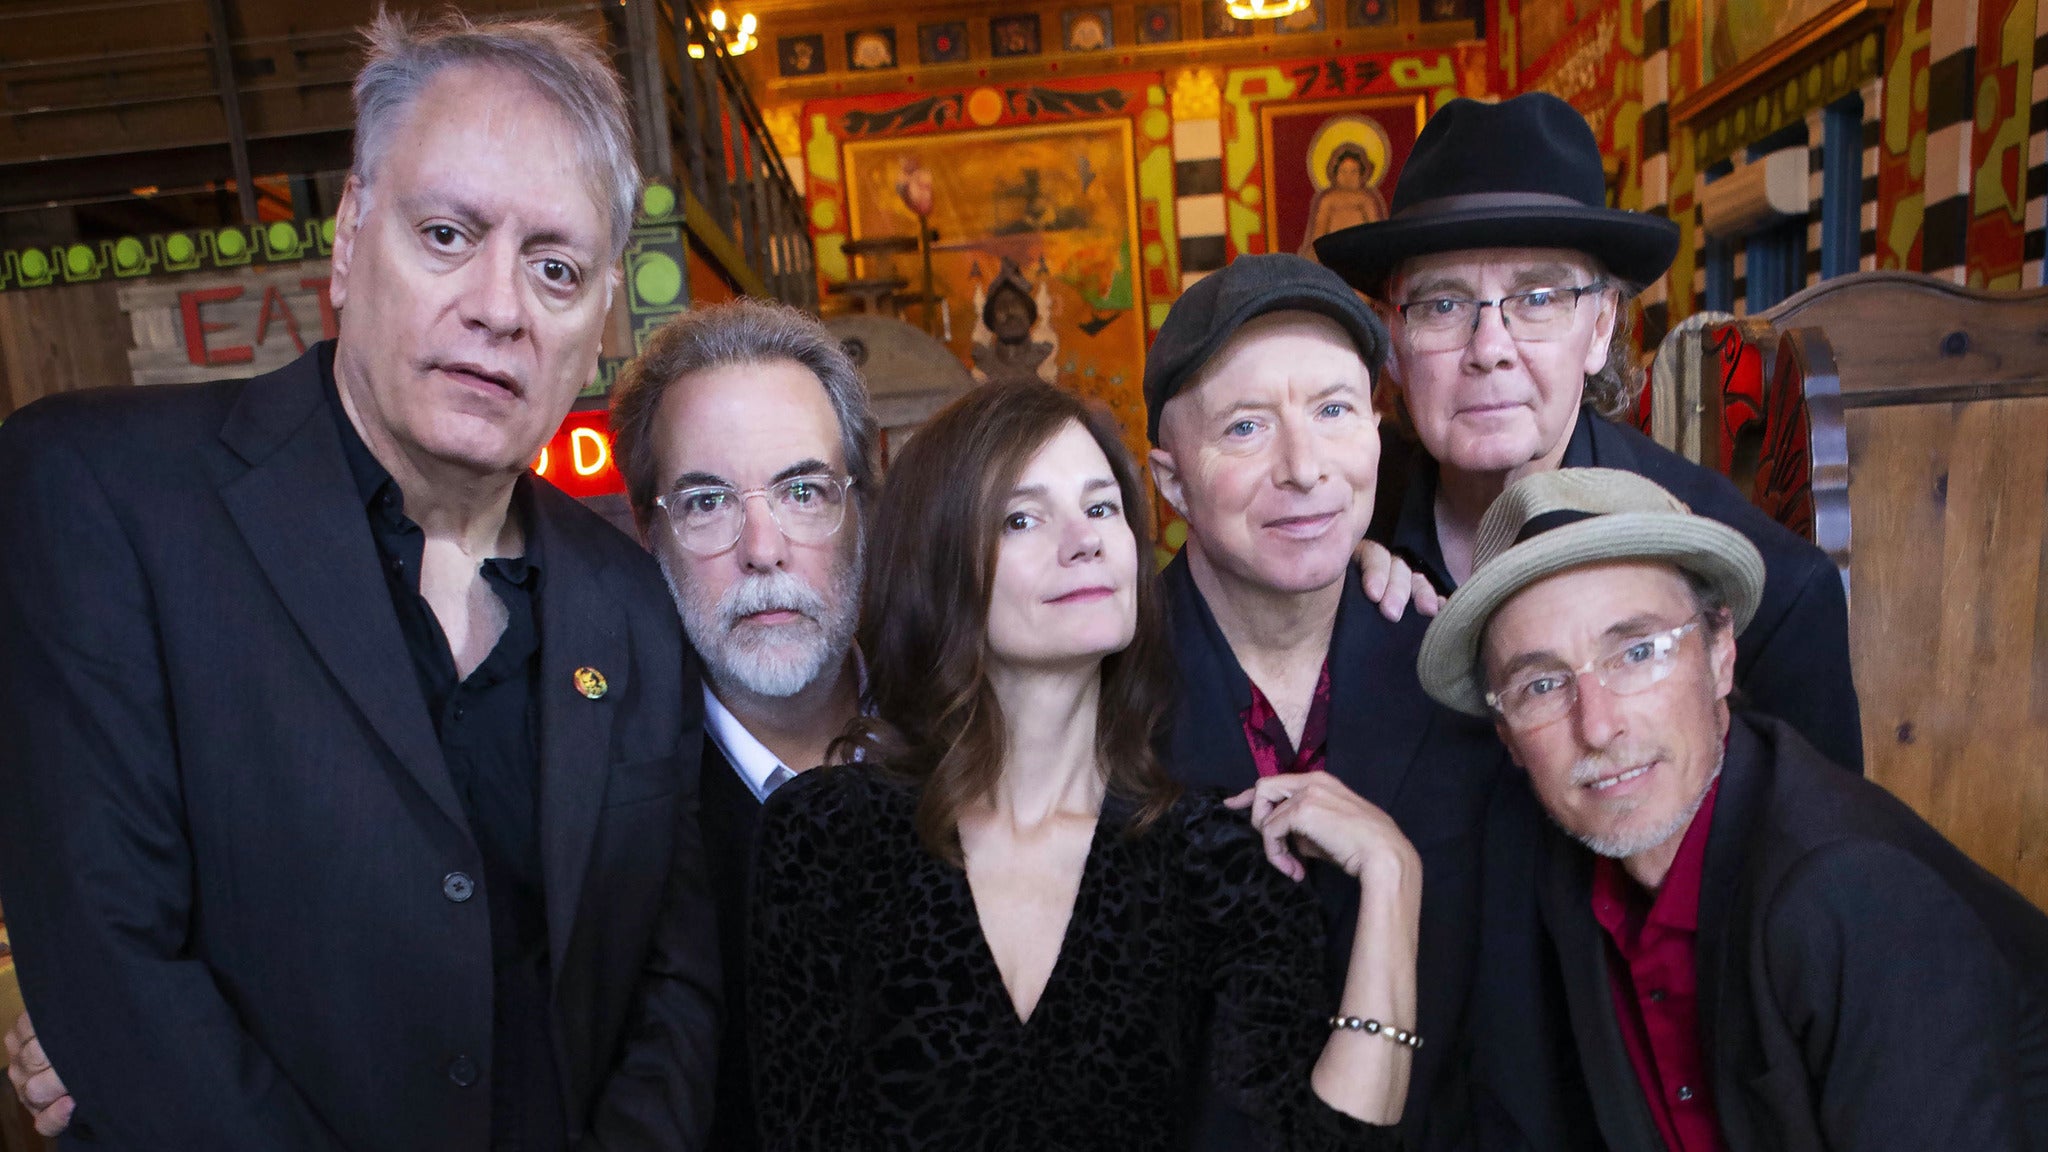 An Evening with 10,000 Maniacs featuring Mary Ramsey pre-sale code for performance tickets in Buffalo, NY (UB Center for the Arts - Mainstage Theatre)